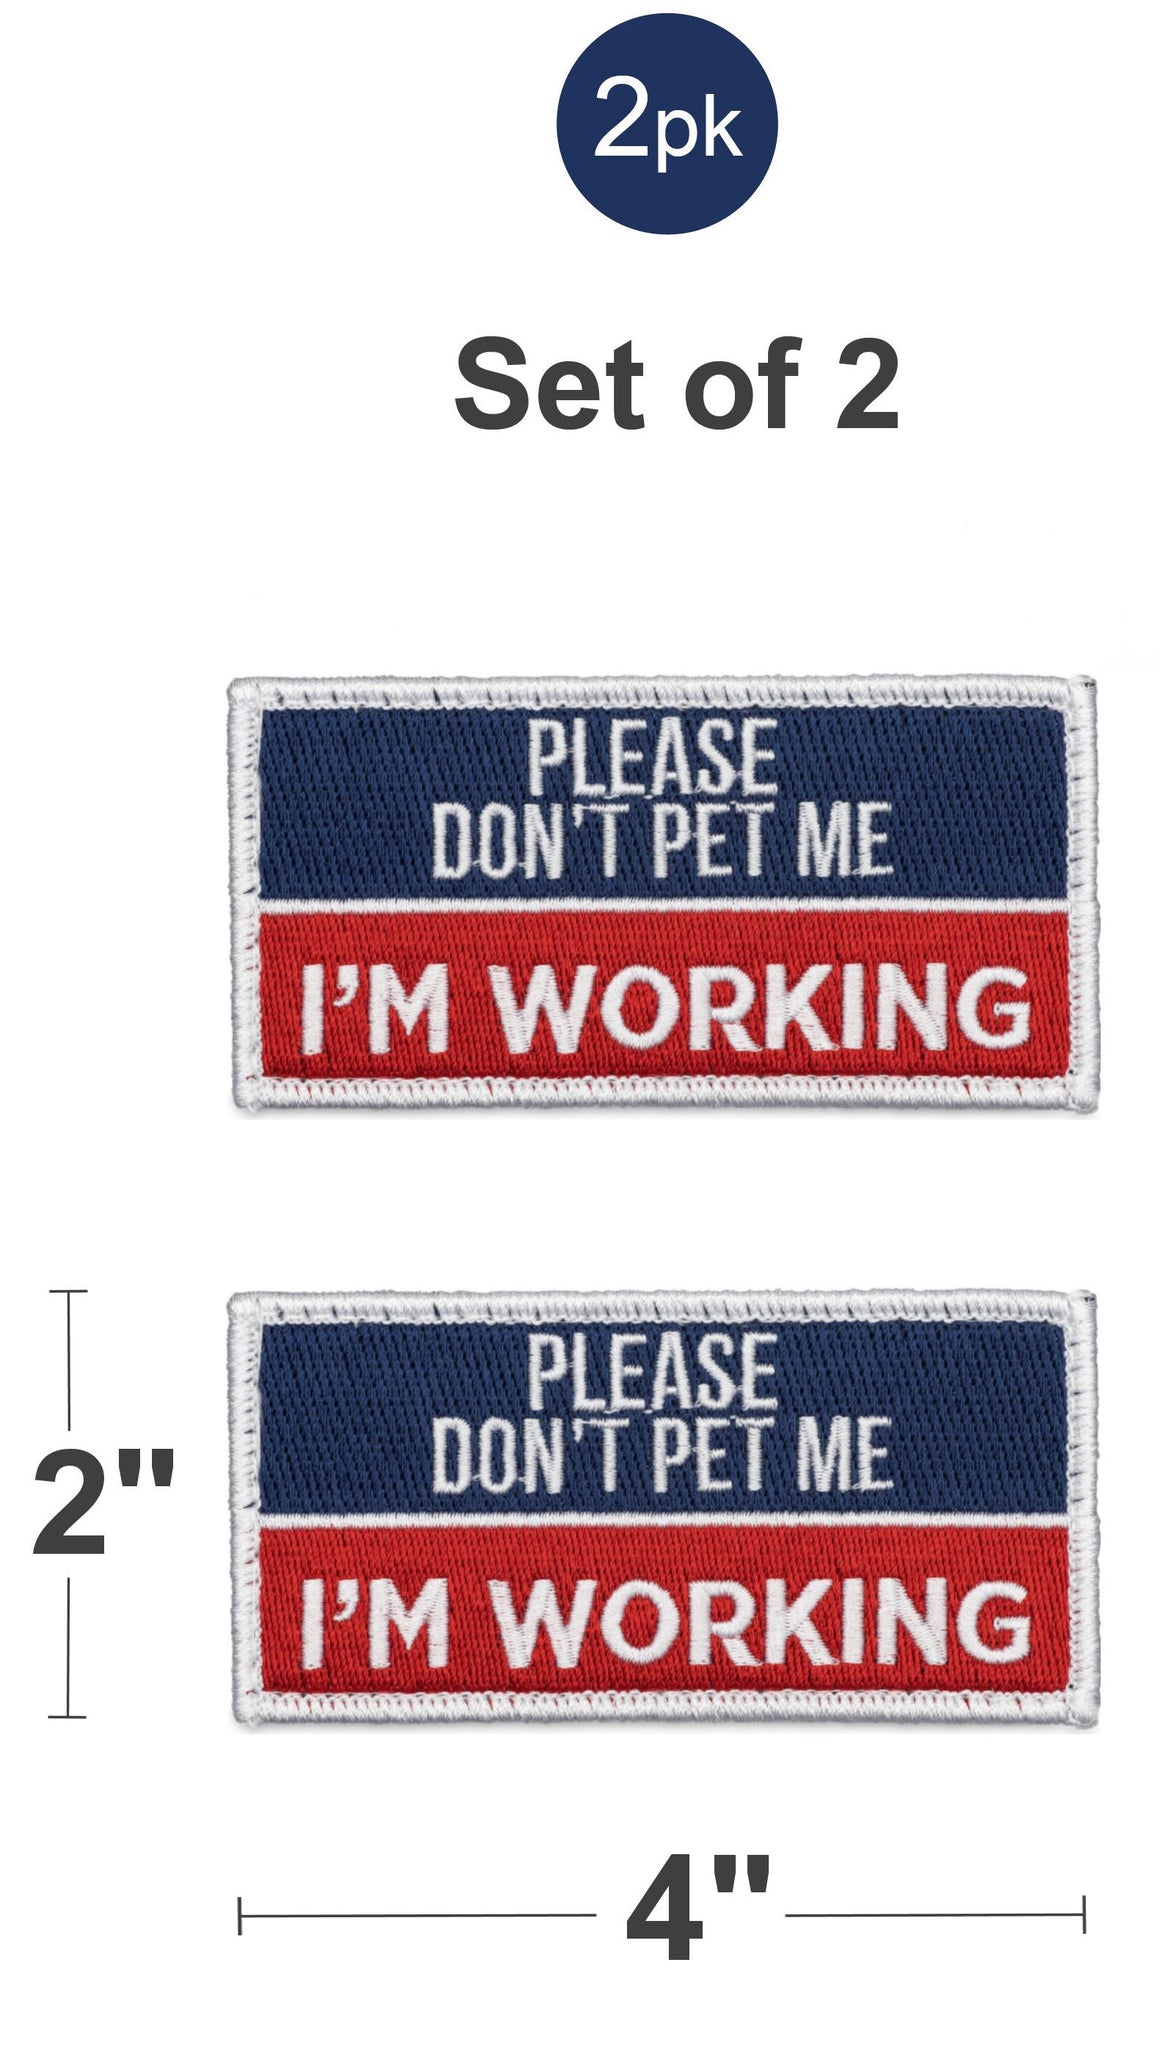 Industrial Puppy Do Not Pet Dog Patches, 2 Count